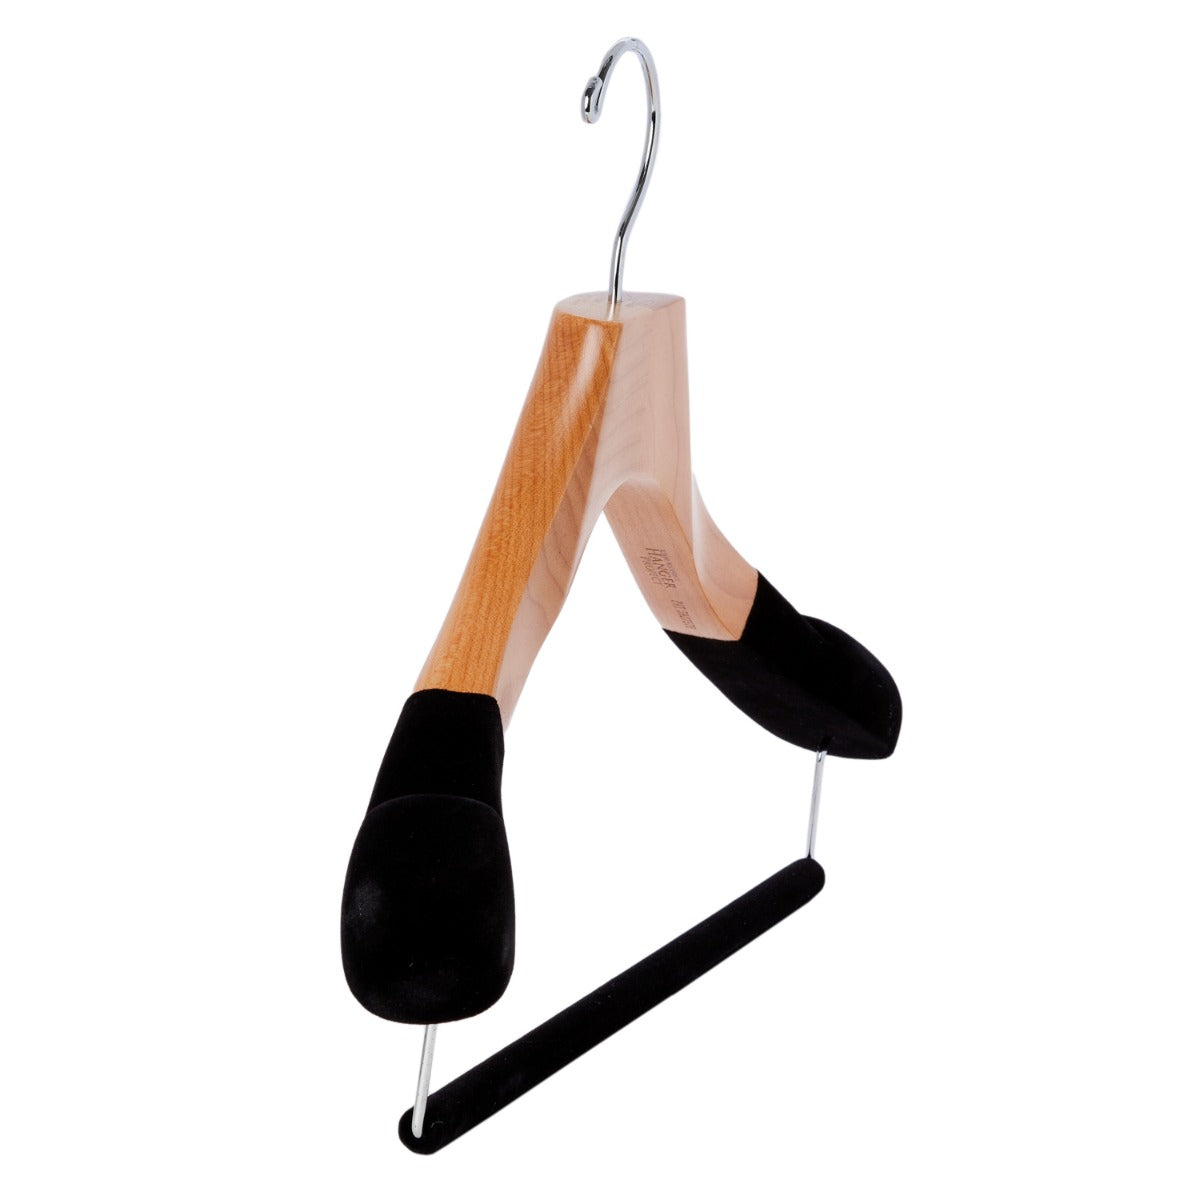 Profile A: Suit and Jacket Hangers, Felted Bar for Women